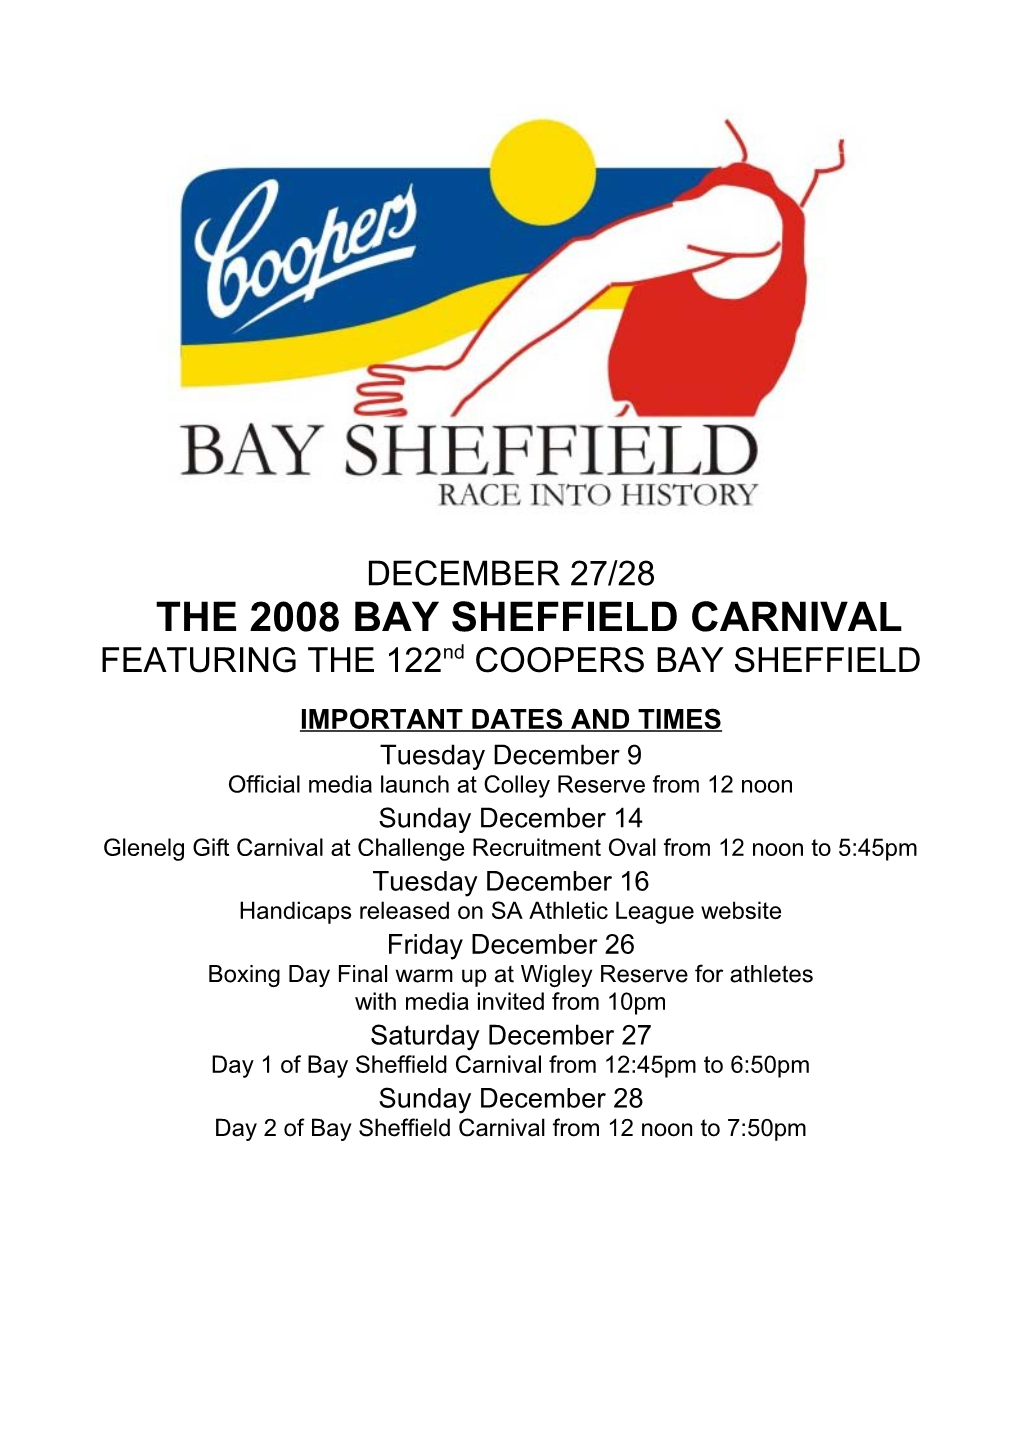 FEATURING the 122Nd COOPERS BAY SHEFFIELD